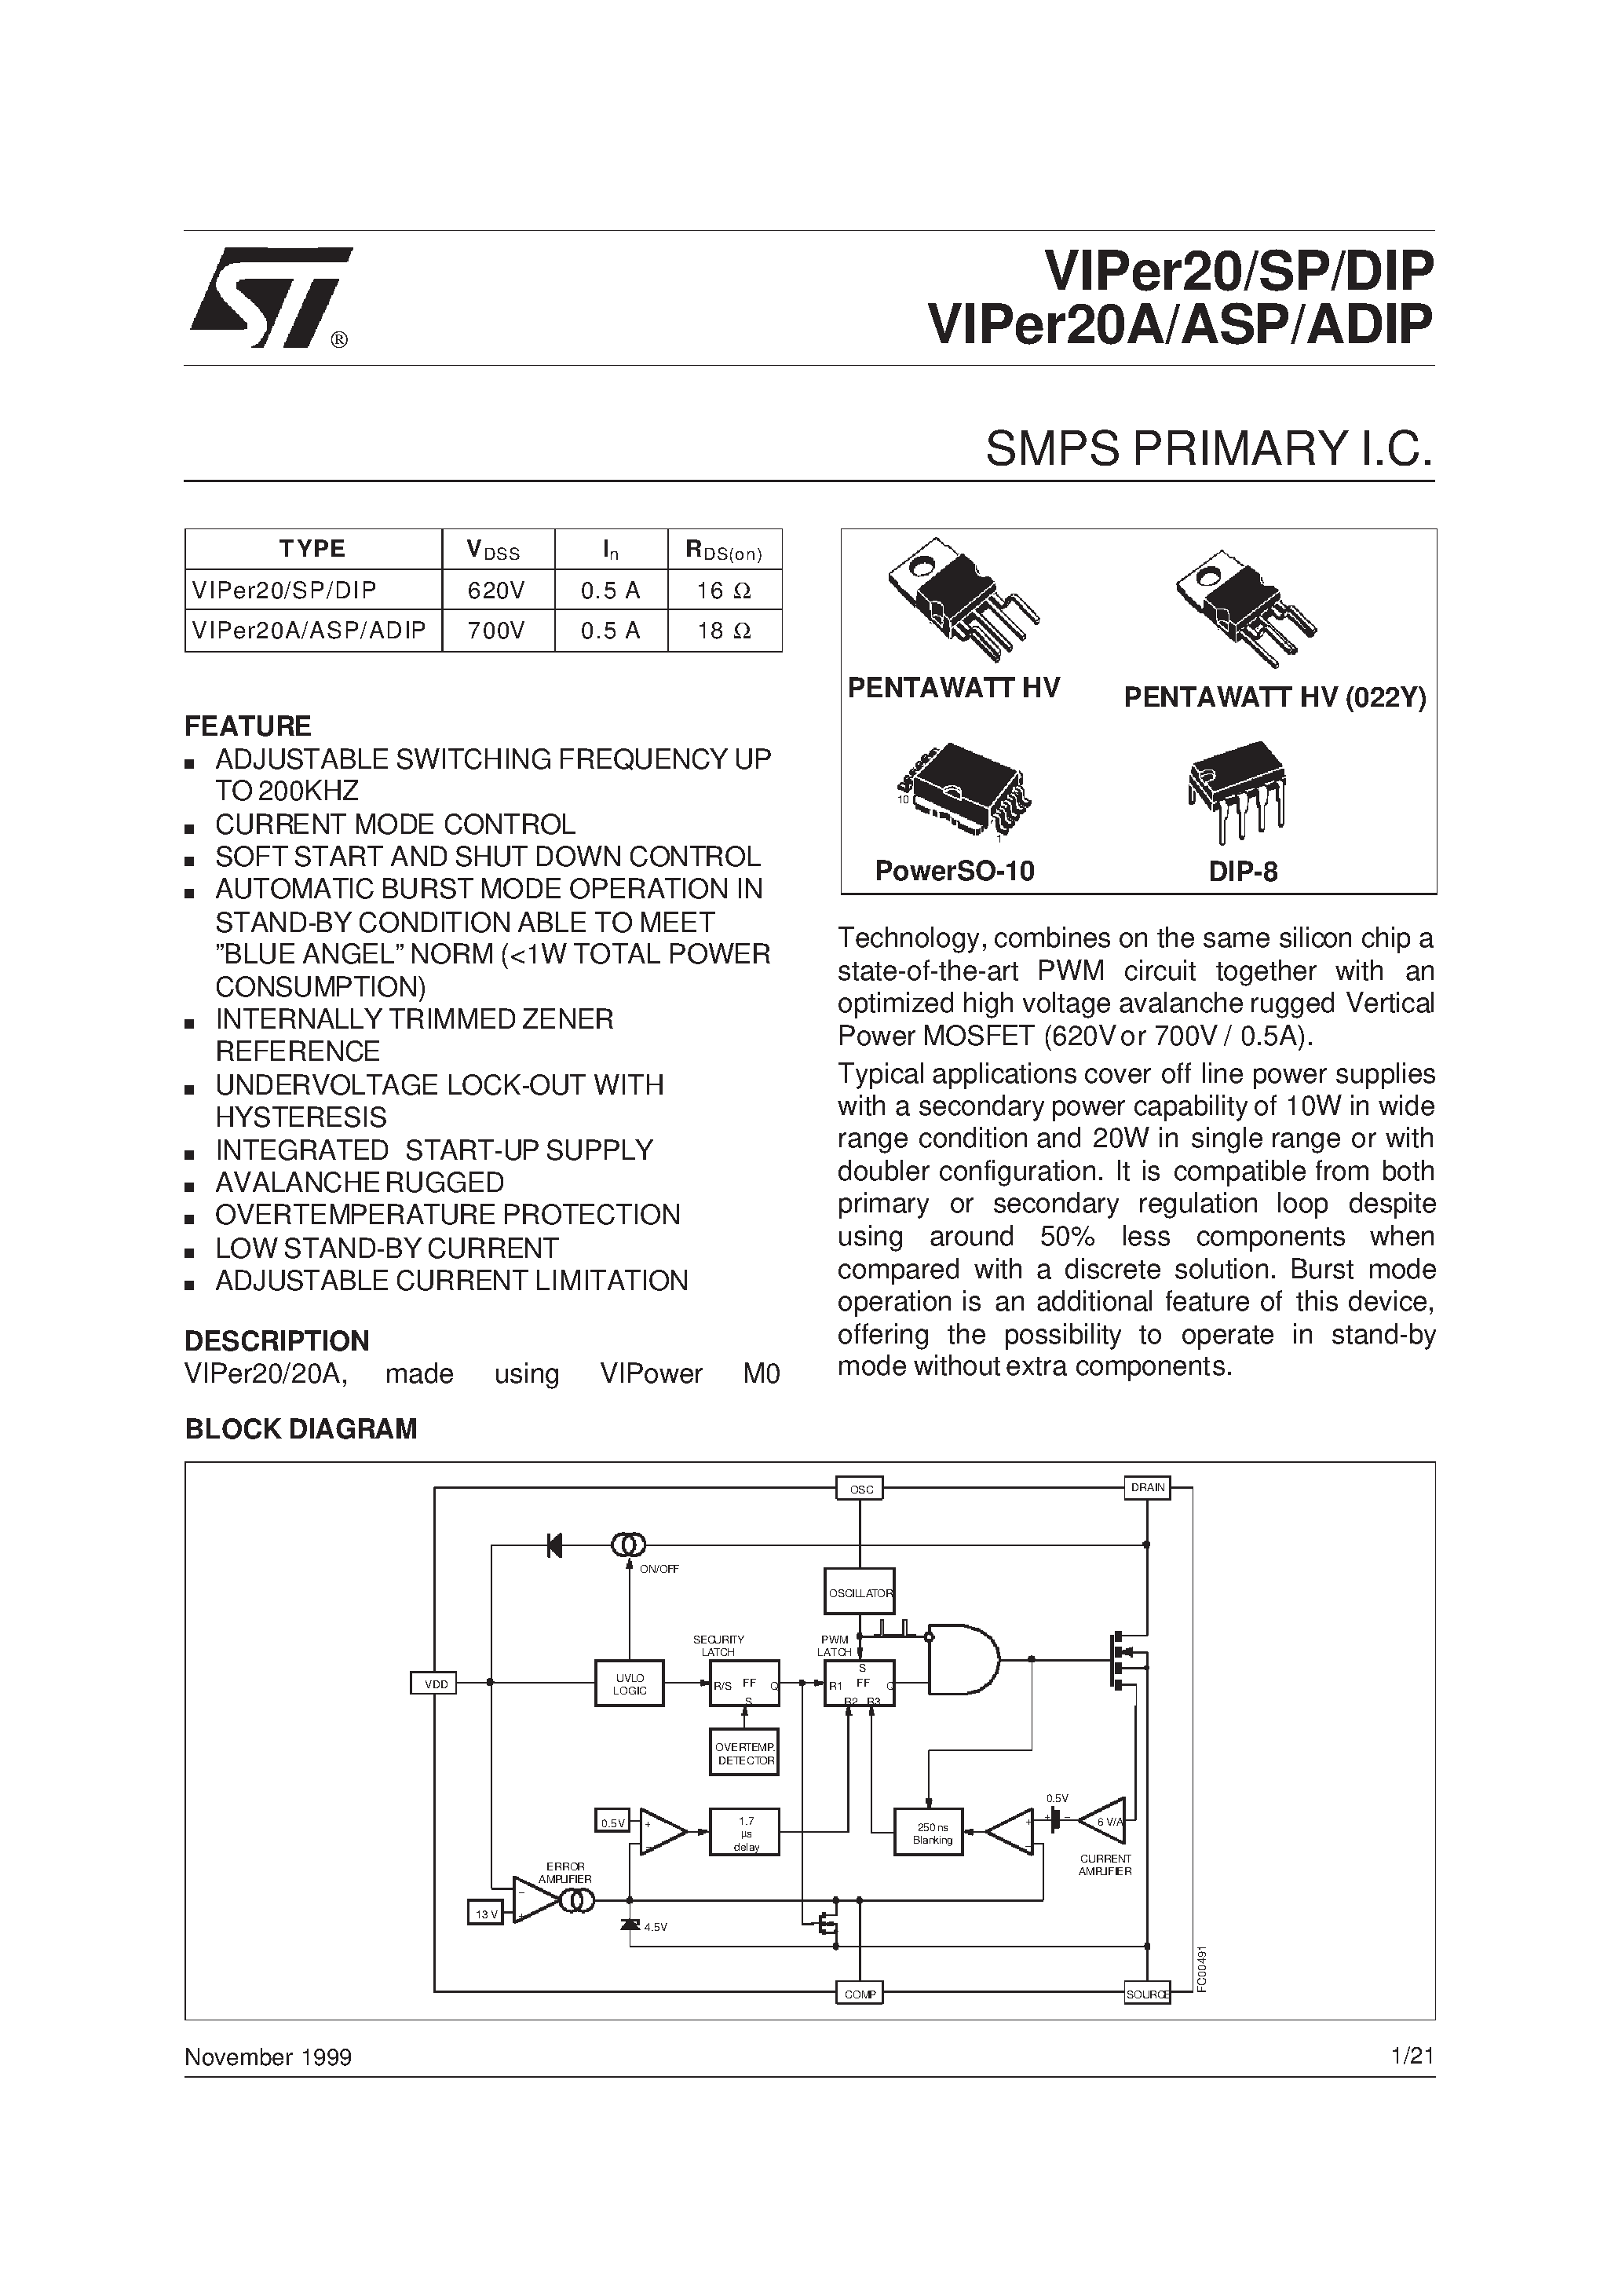 Datasheet VIPer20ASP - SMPS PRIMARY I.C. page 1